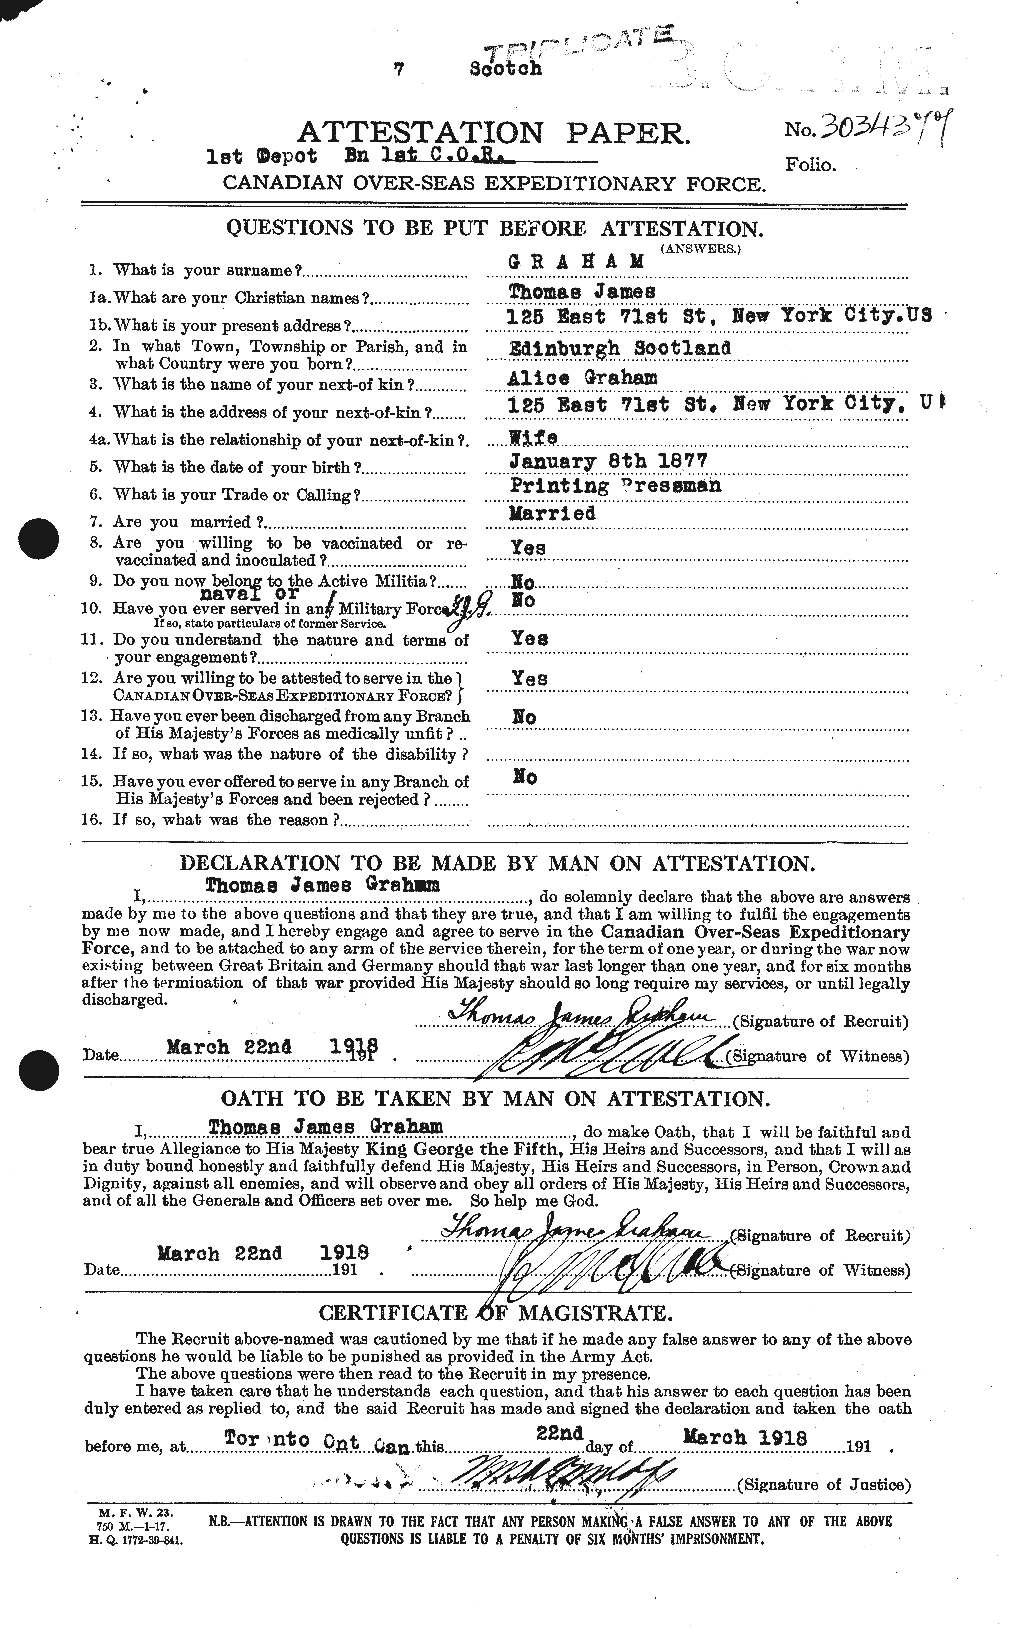 Personnel Records of the First World War - CEF 359520a